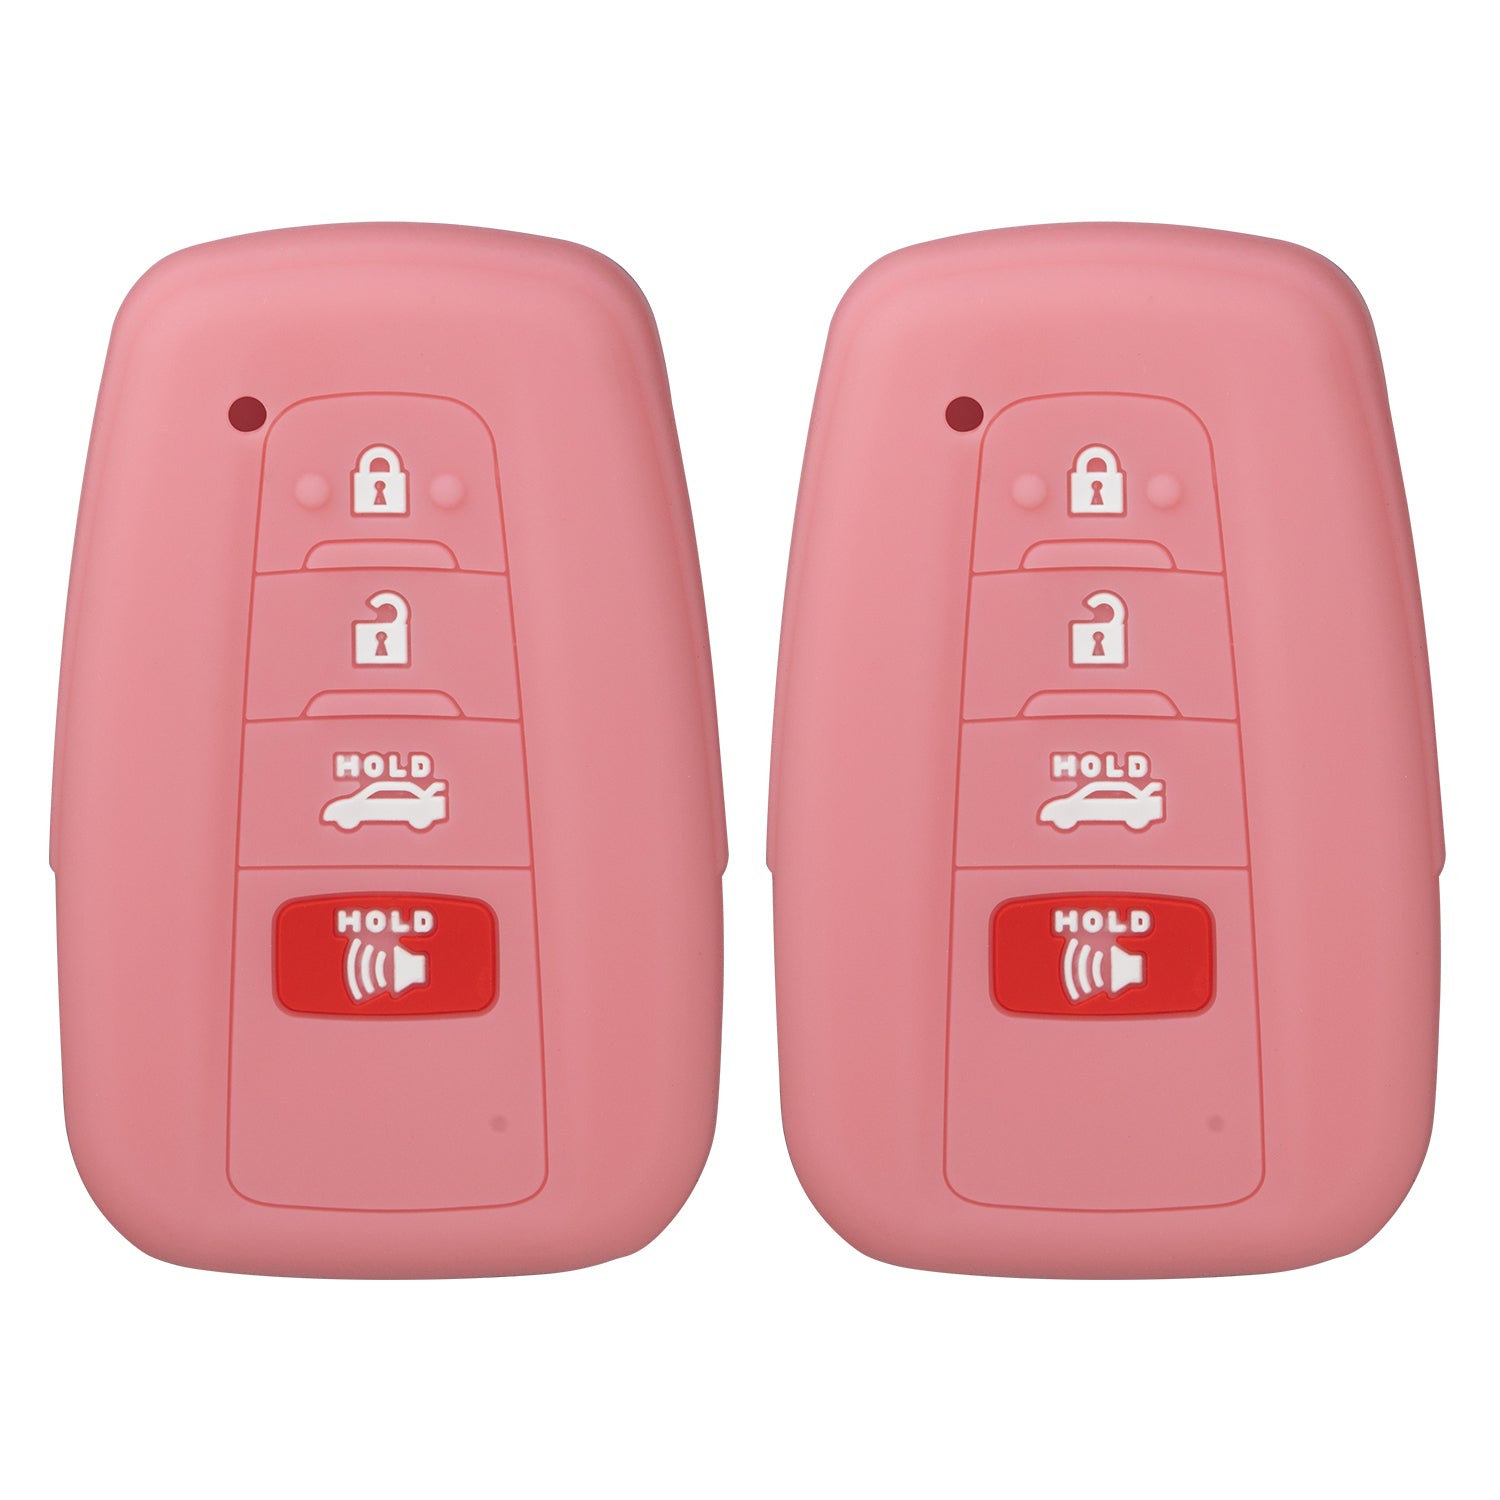 Silicone Case 4 Button Shell for Toyota Smart Proximity Remote Key HYQ14FBE, HYQ14FBC, HYQ14AHP, HYQ14FBN (Double Pink)